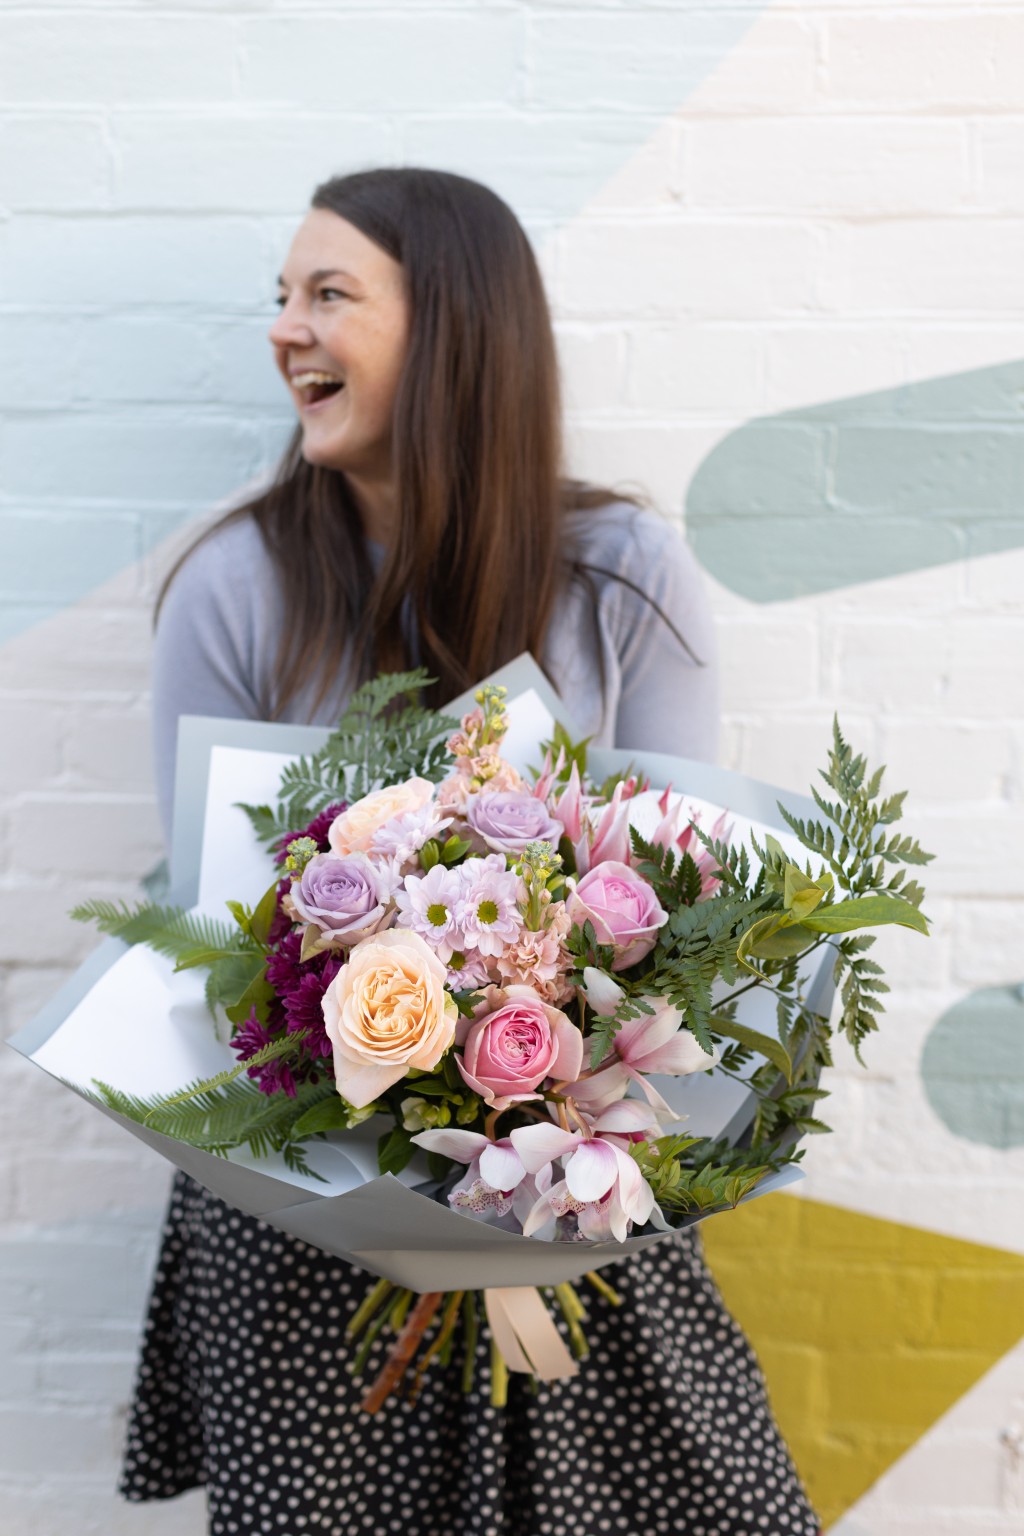 Laughing woman holding an extra large bouquet of beautiful flowers.